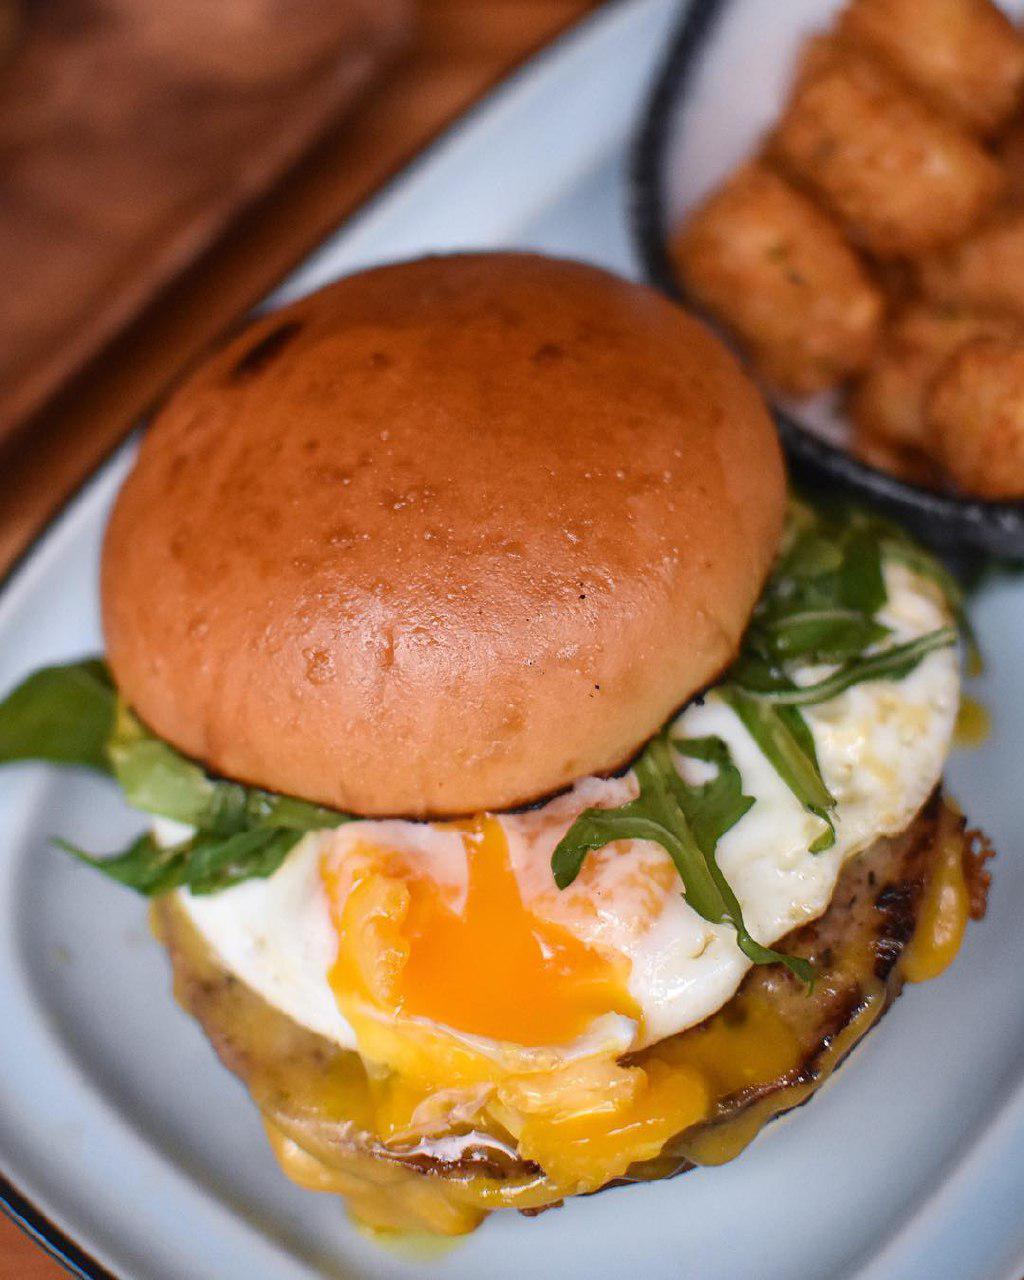 Burger with egg at Three Buns Quayside